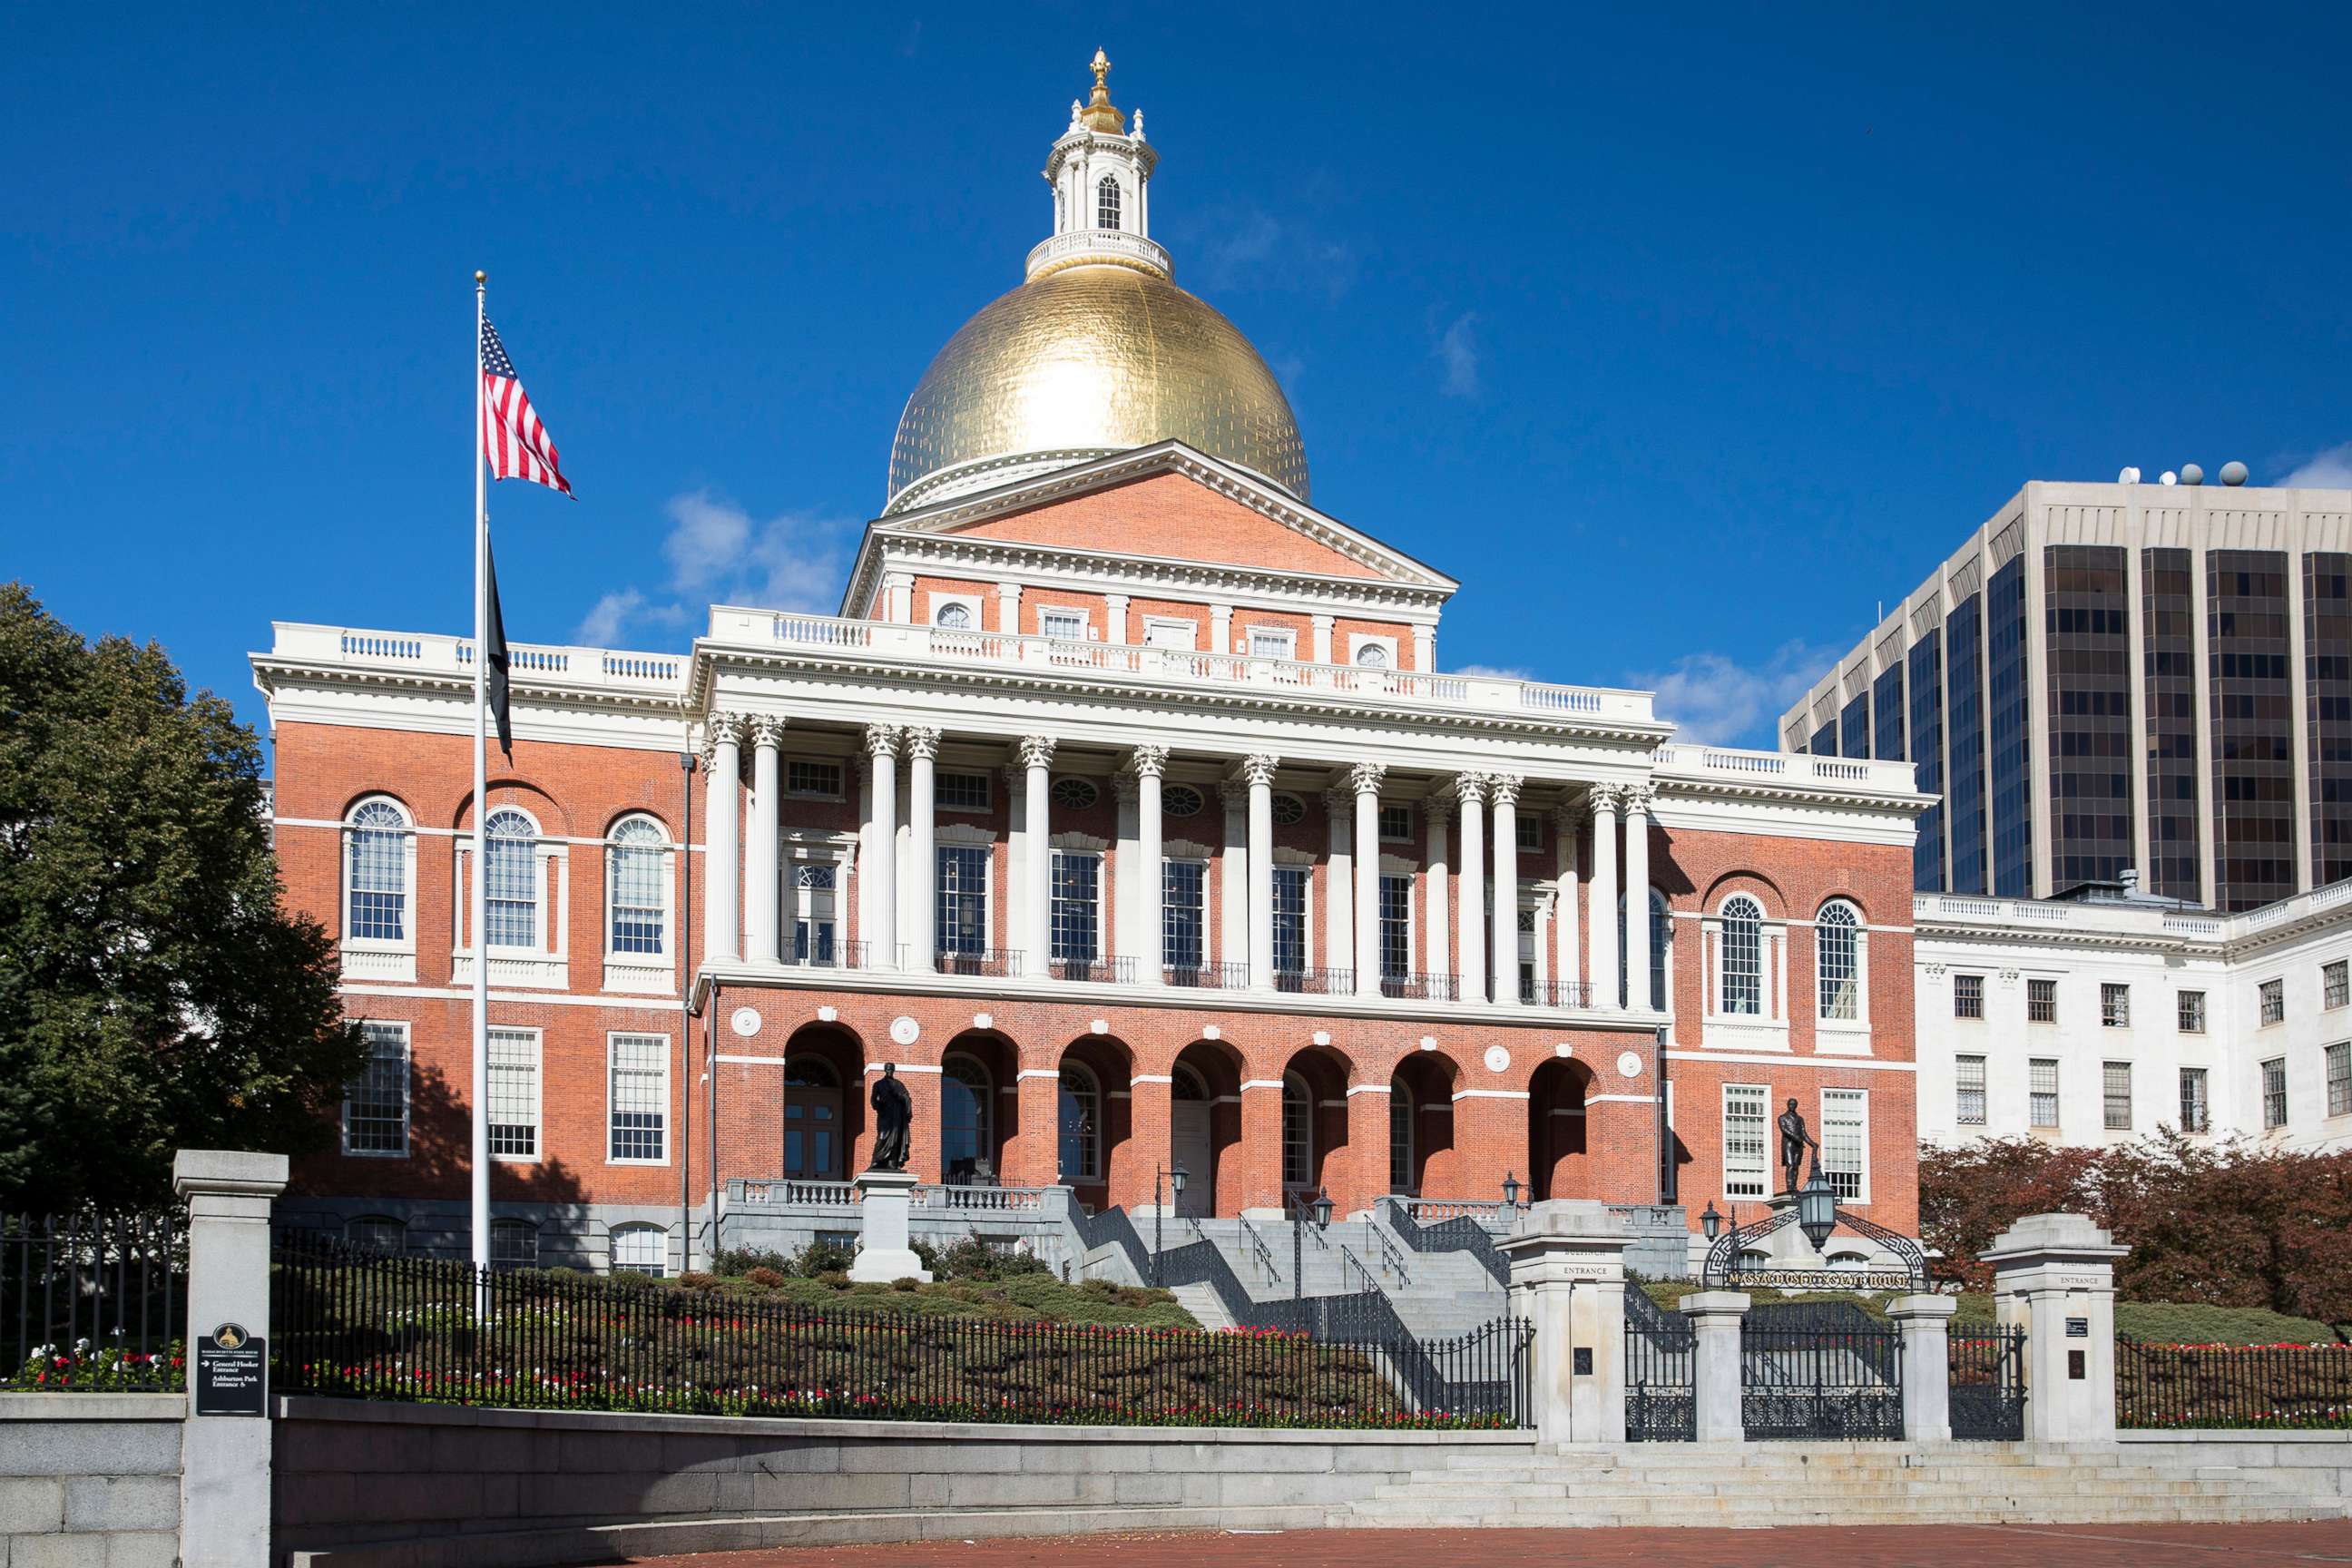 PHOTO: In this undated file photo, the Massachusetts State House in Boston is shown.